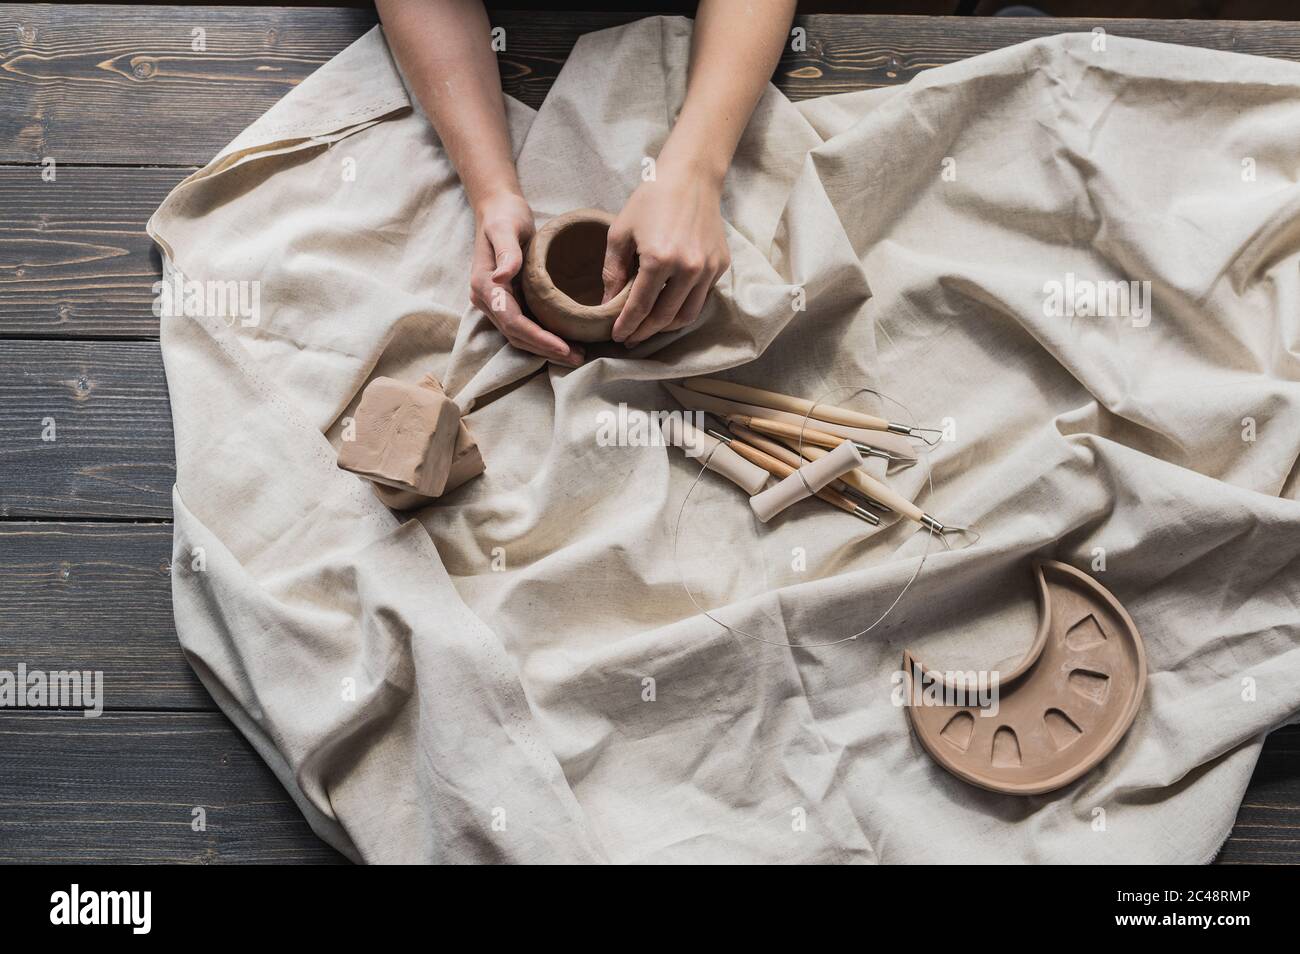 Female potters hand making clay pottery at the table with a different wooden tools close up. Stock Photo